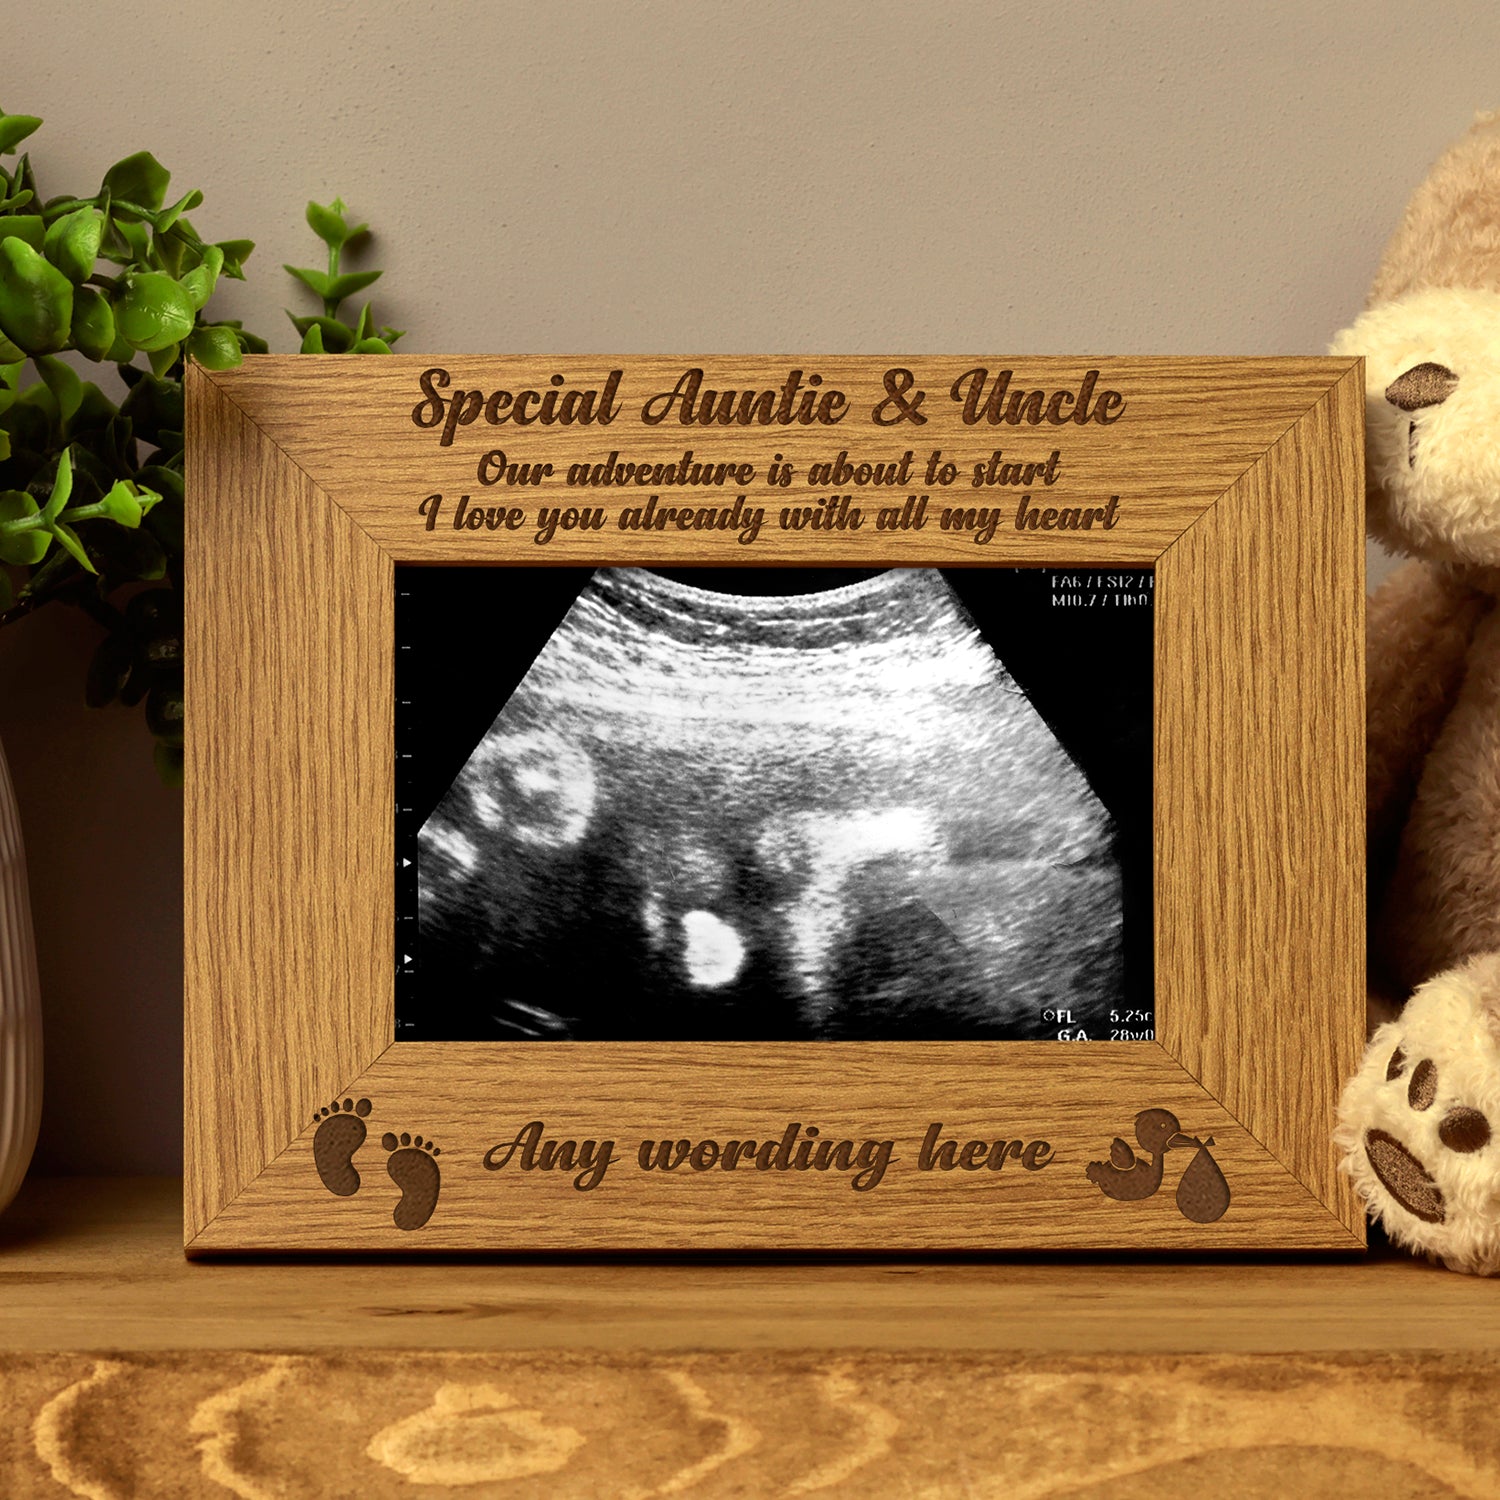 New Baby Pregnancy Scan Wooden Photo Frame Personalised Auntie & Uncle Gift - ukgiftstoreonline